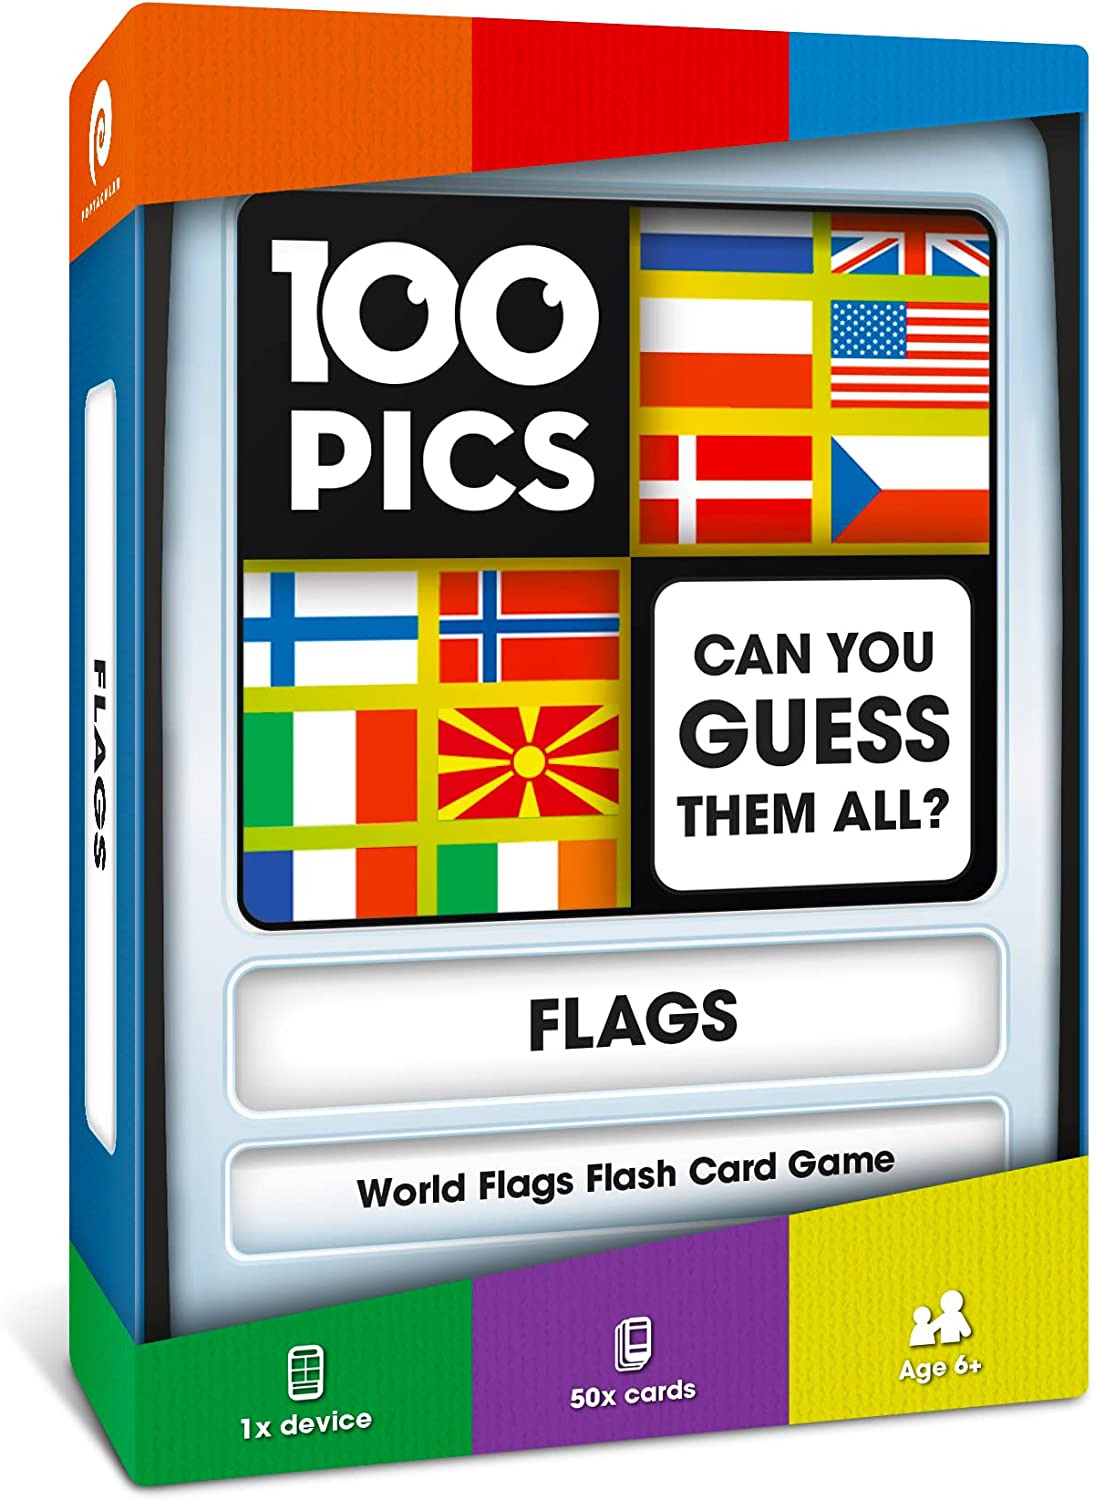 100 PICS Flags of the World Travel Game - Learn 100 Country Flags | Flash Cards 